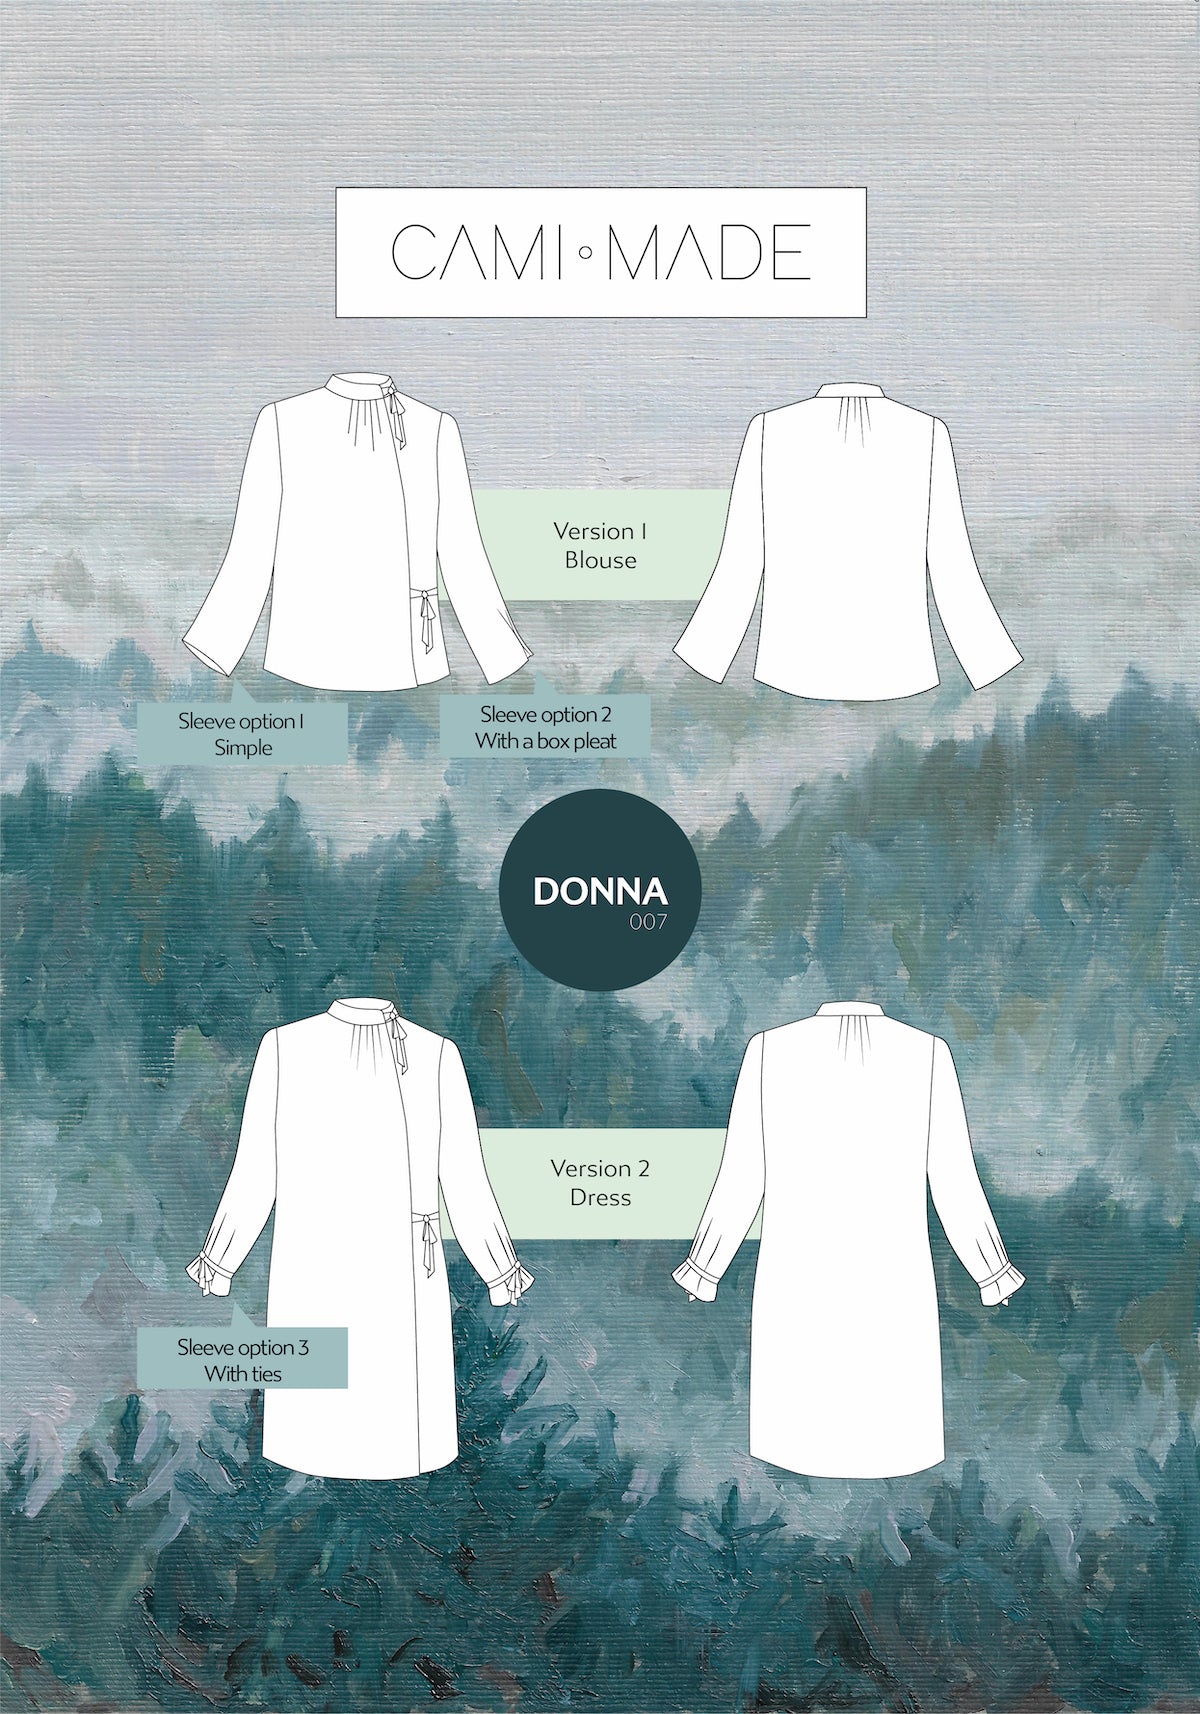 Camimade Donna Blouse and Dress